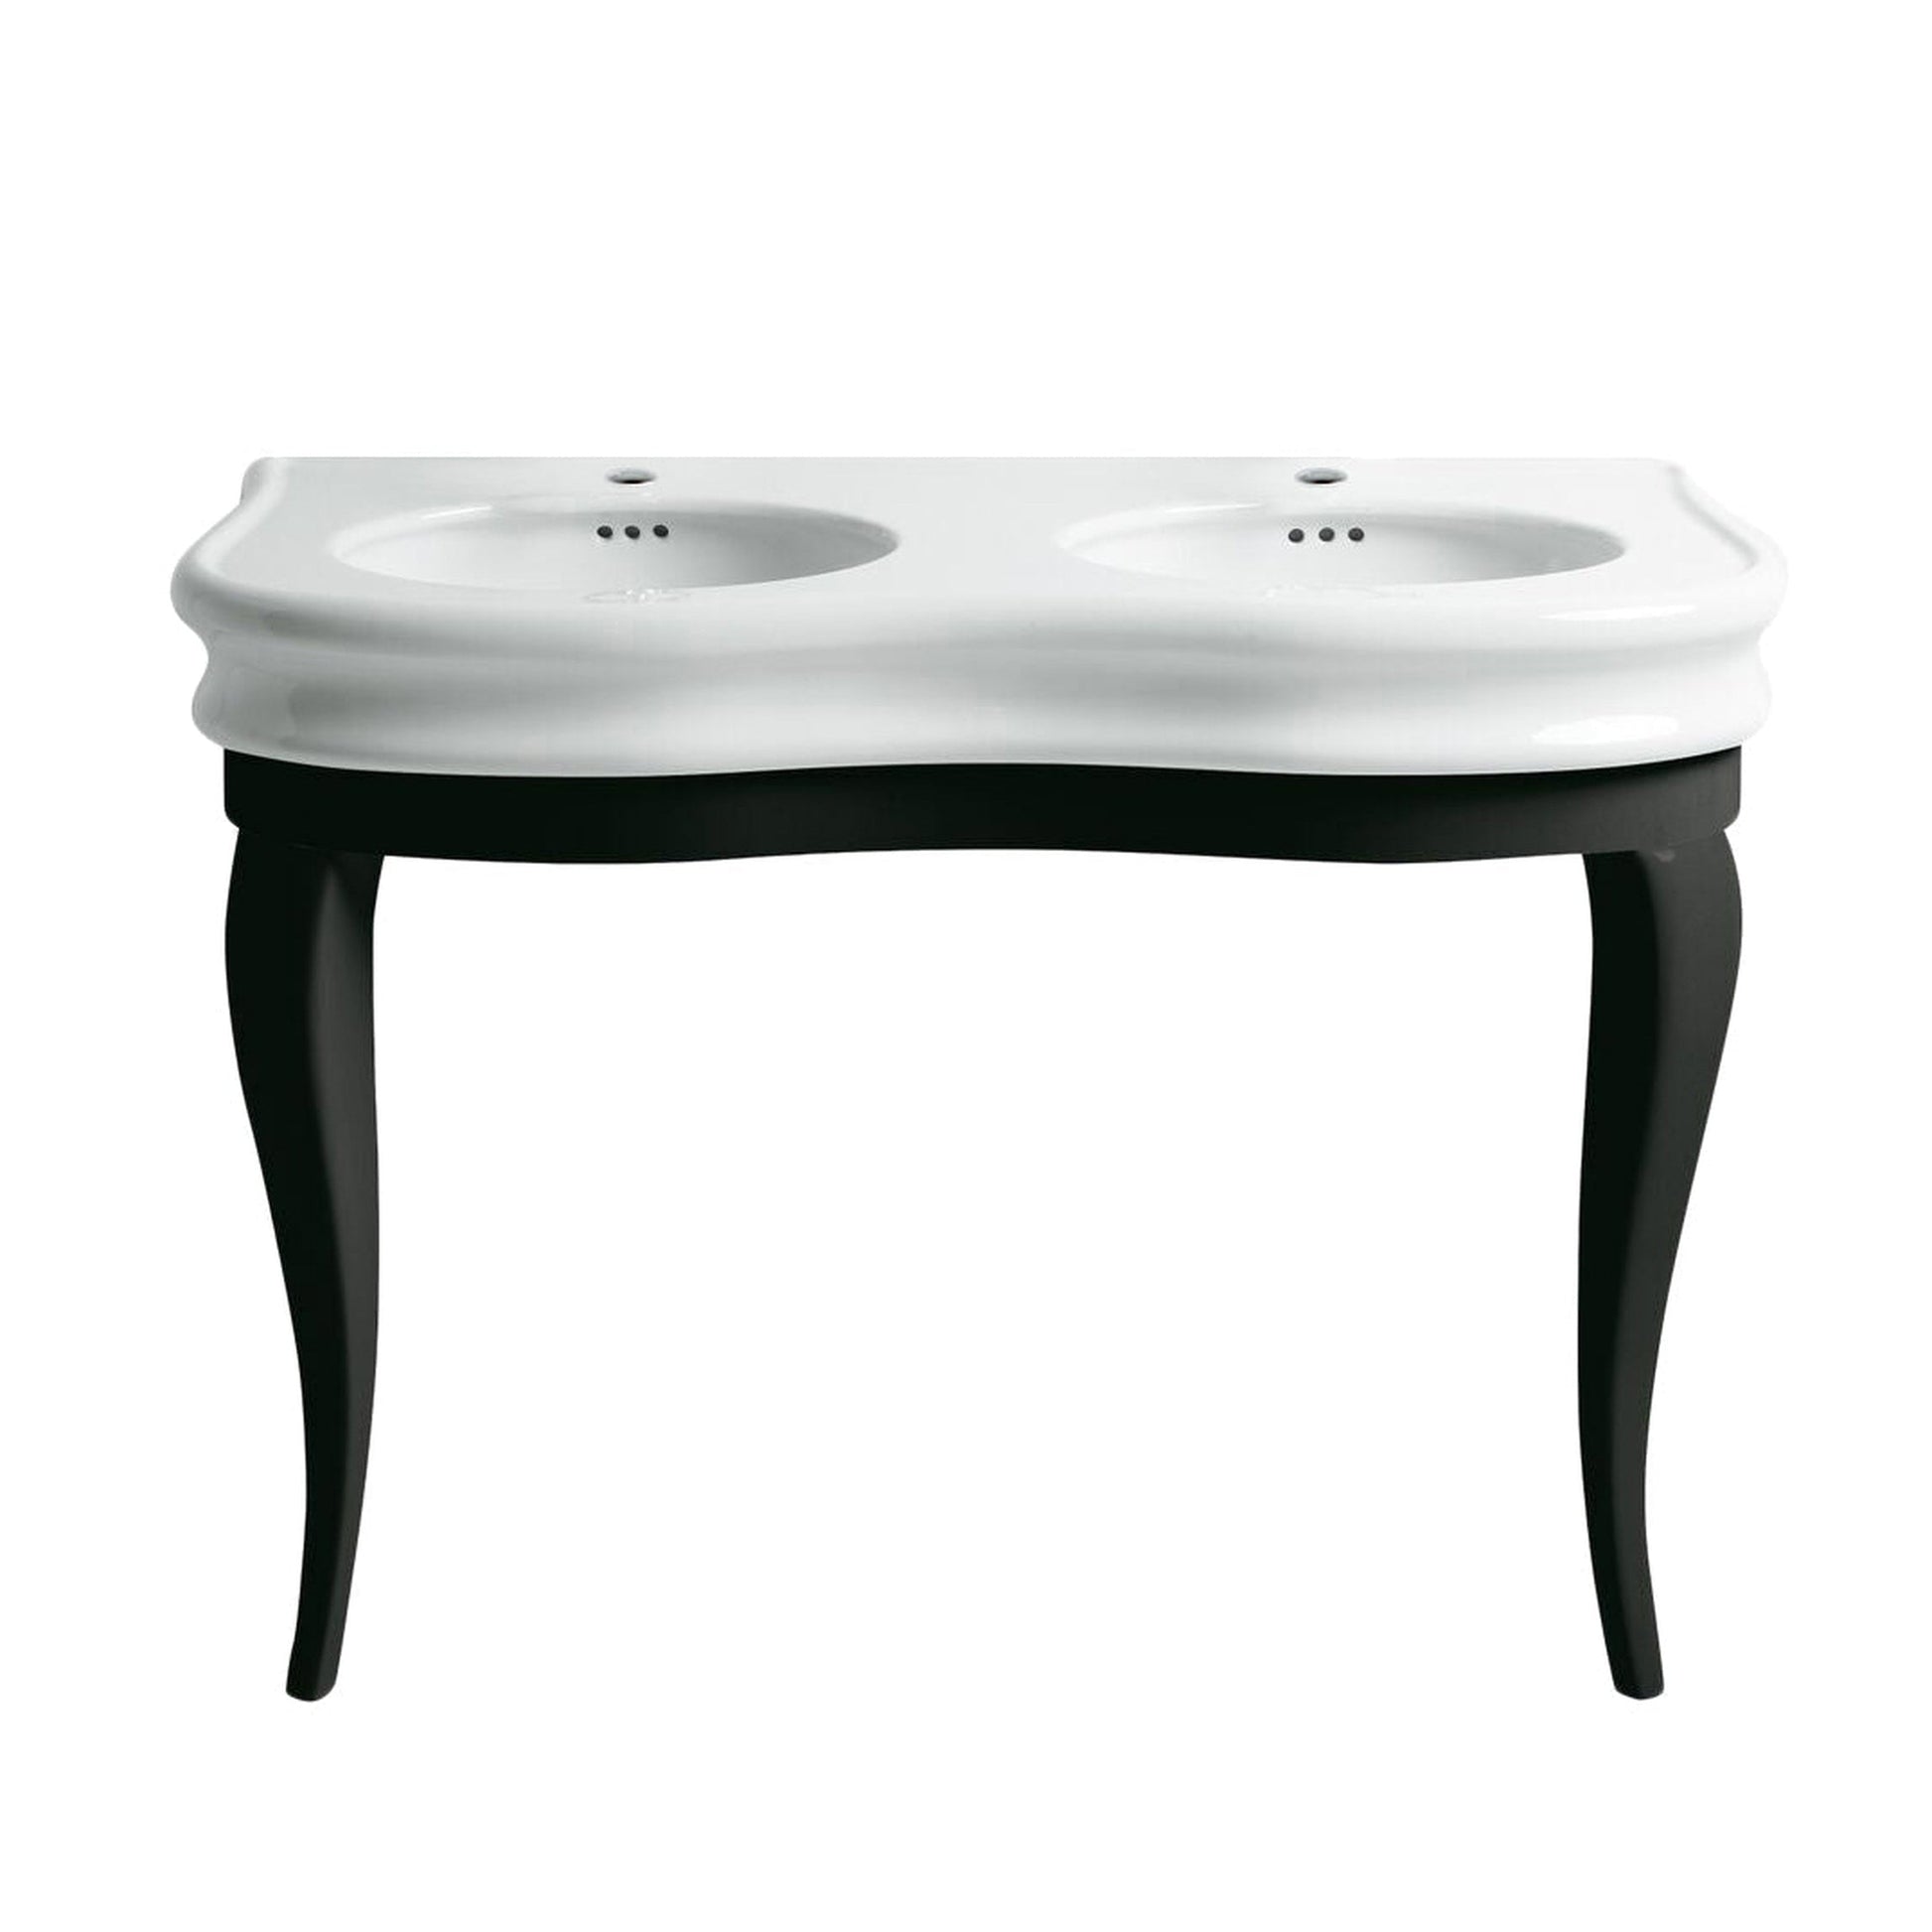 Whitehaus Isabella LA12-LAM120B White/Black Large Console With Double Integrated Oval Bowls With Overflow and Black Wooden Leg Support